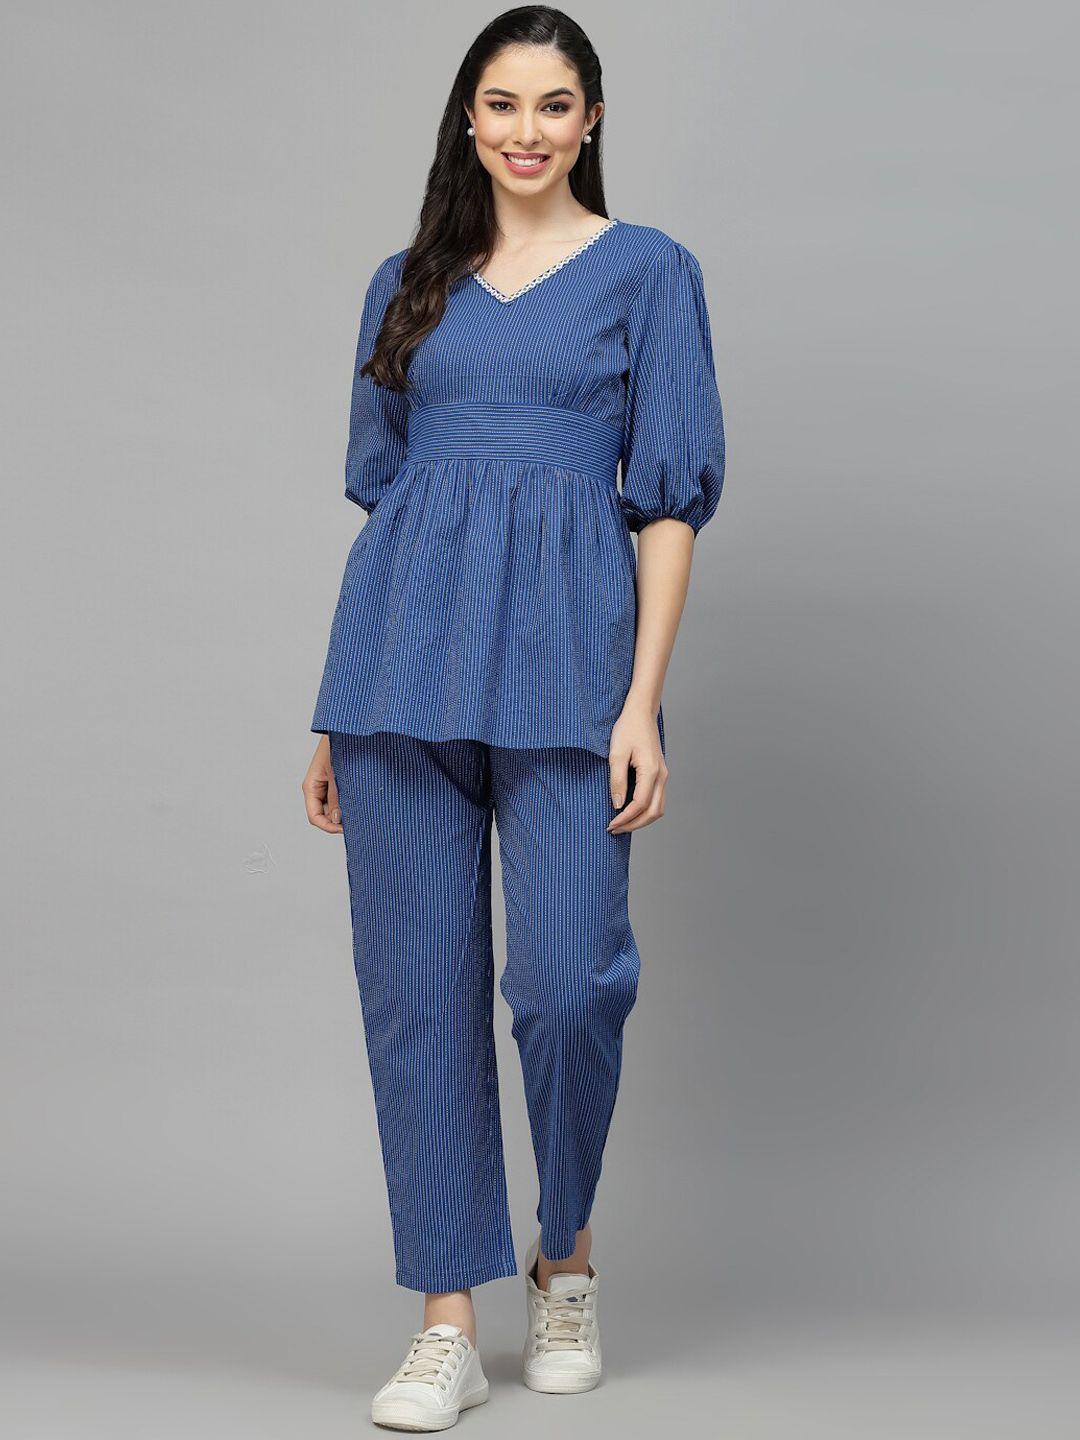 stylum-blue-striped-pure-cotton-top-and-trousers